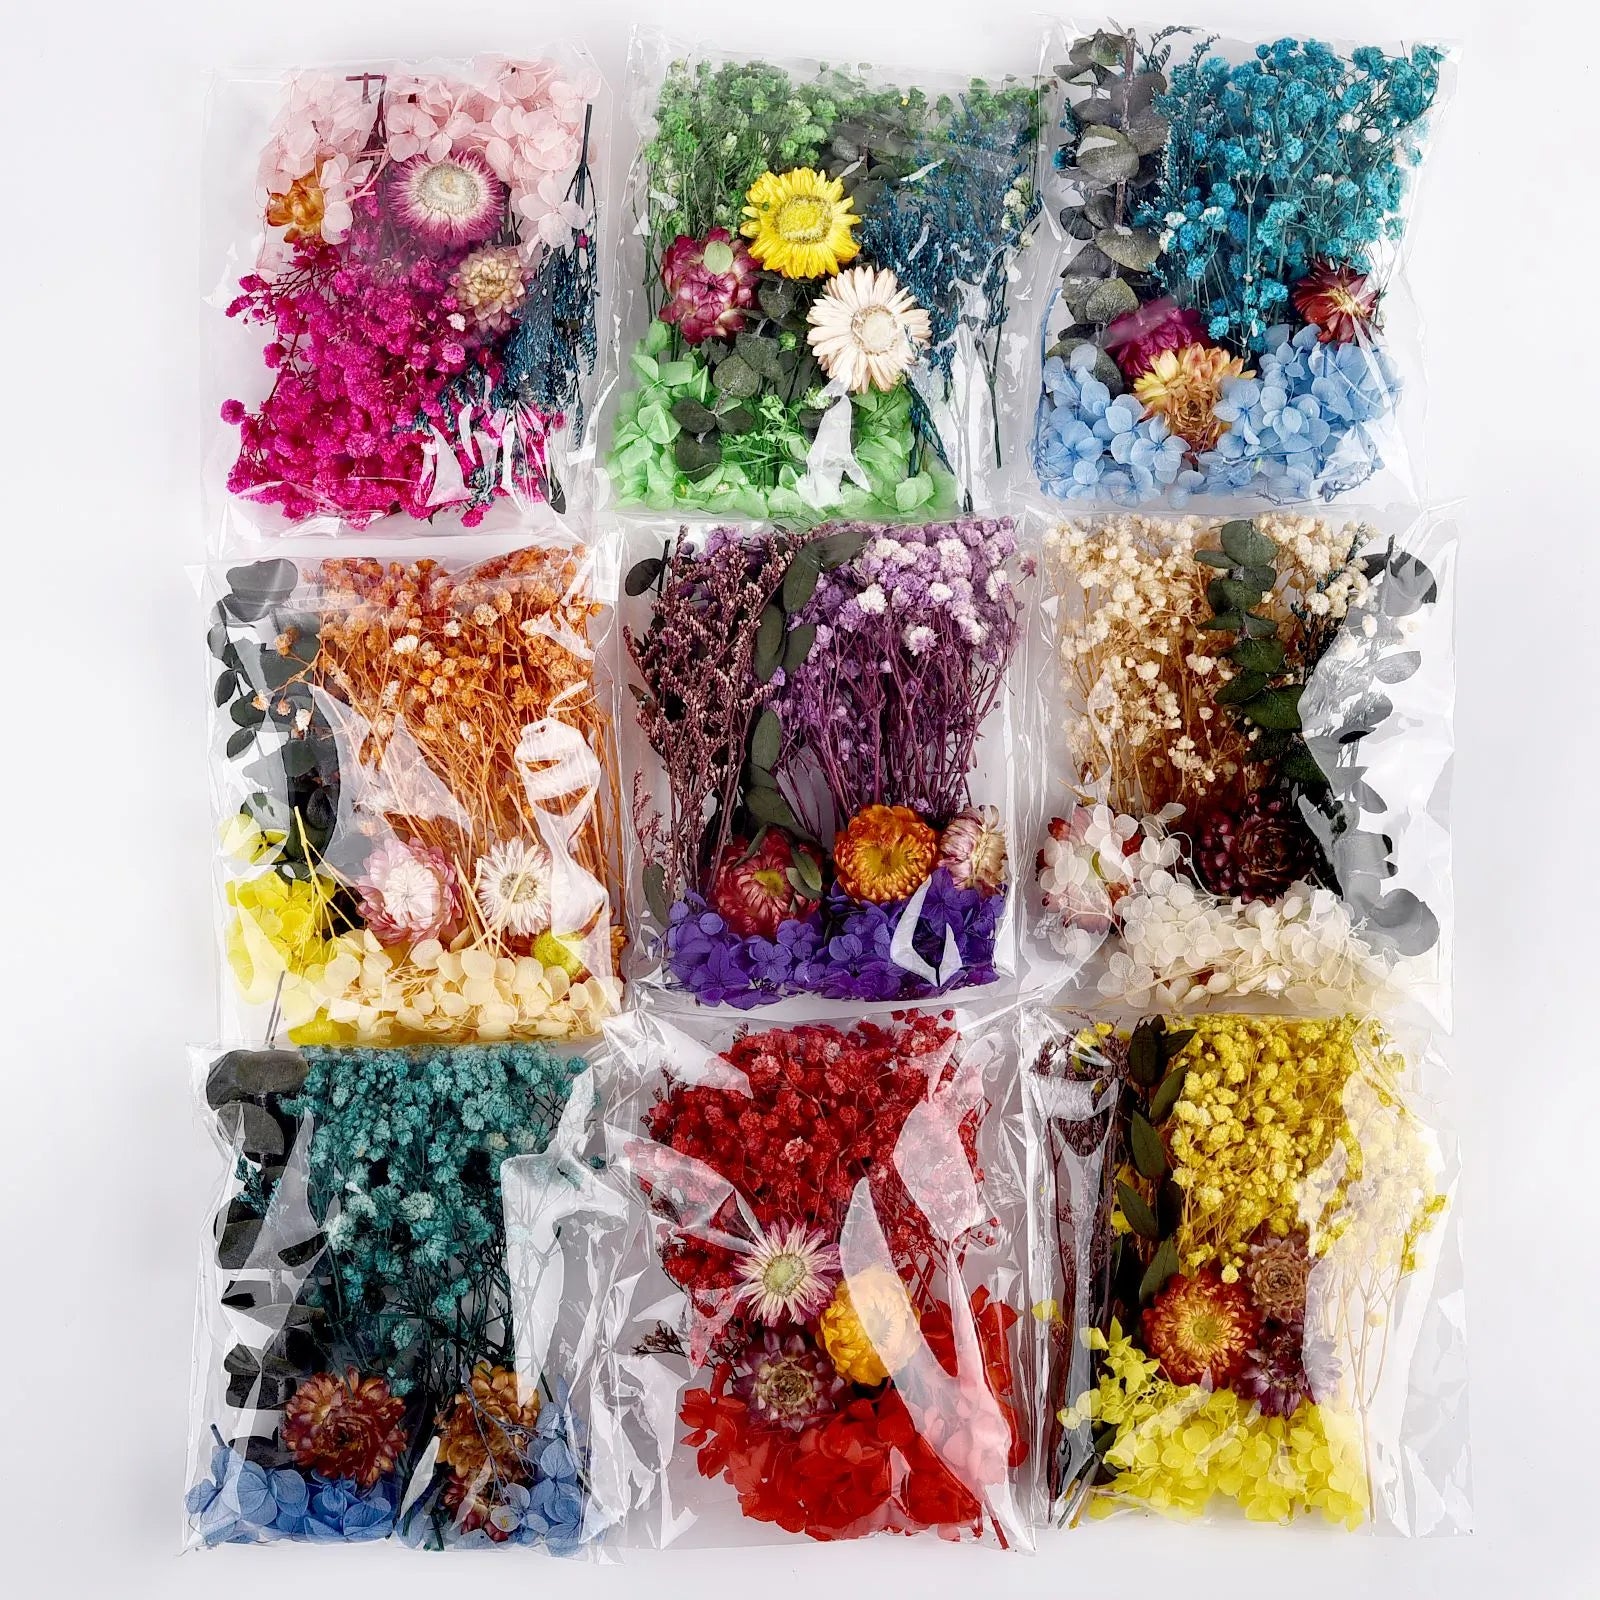 1Bag Dried Flowers Dry Plants For Epoxy Resin Casting Mold DIY Aromatherapy Candle Molds Crafts Tools Jewelry Making Accessories KENNRICK